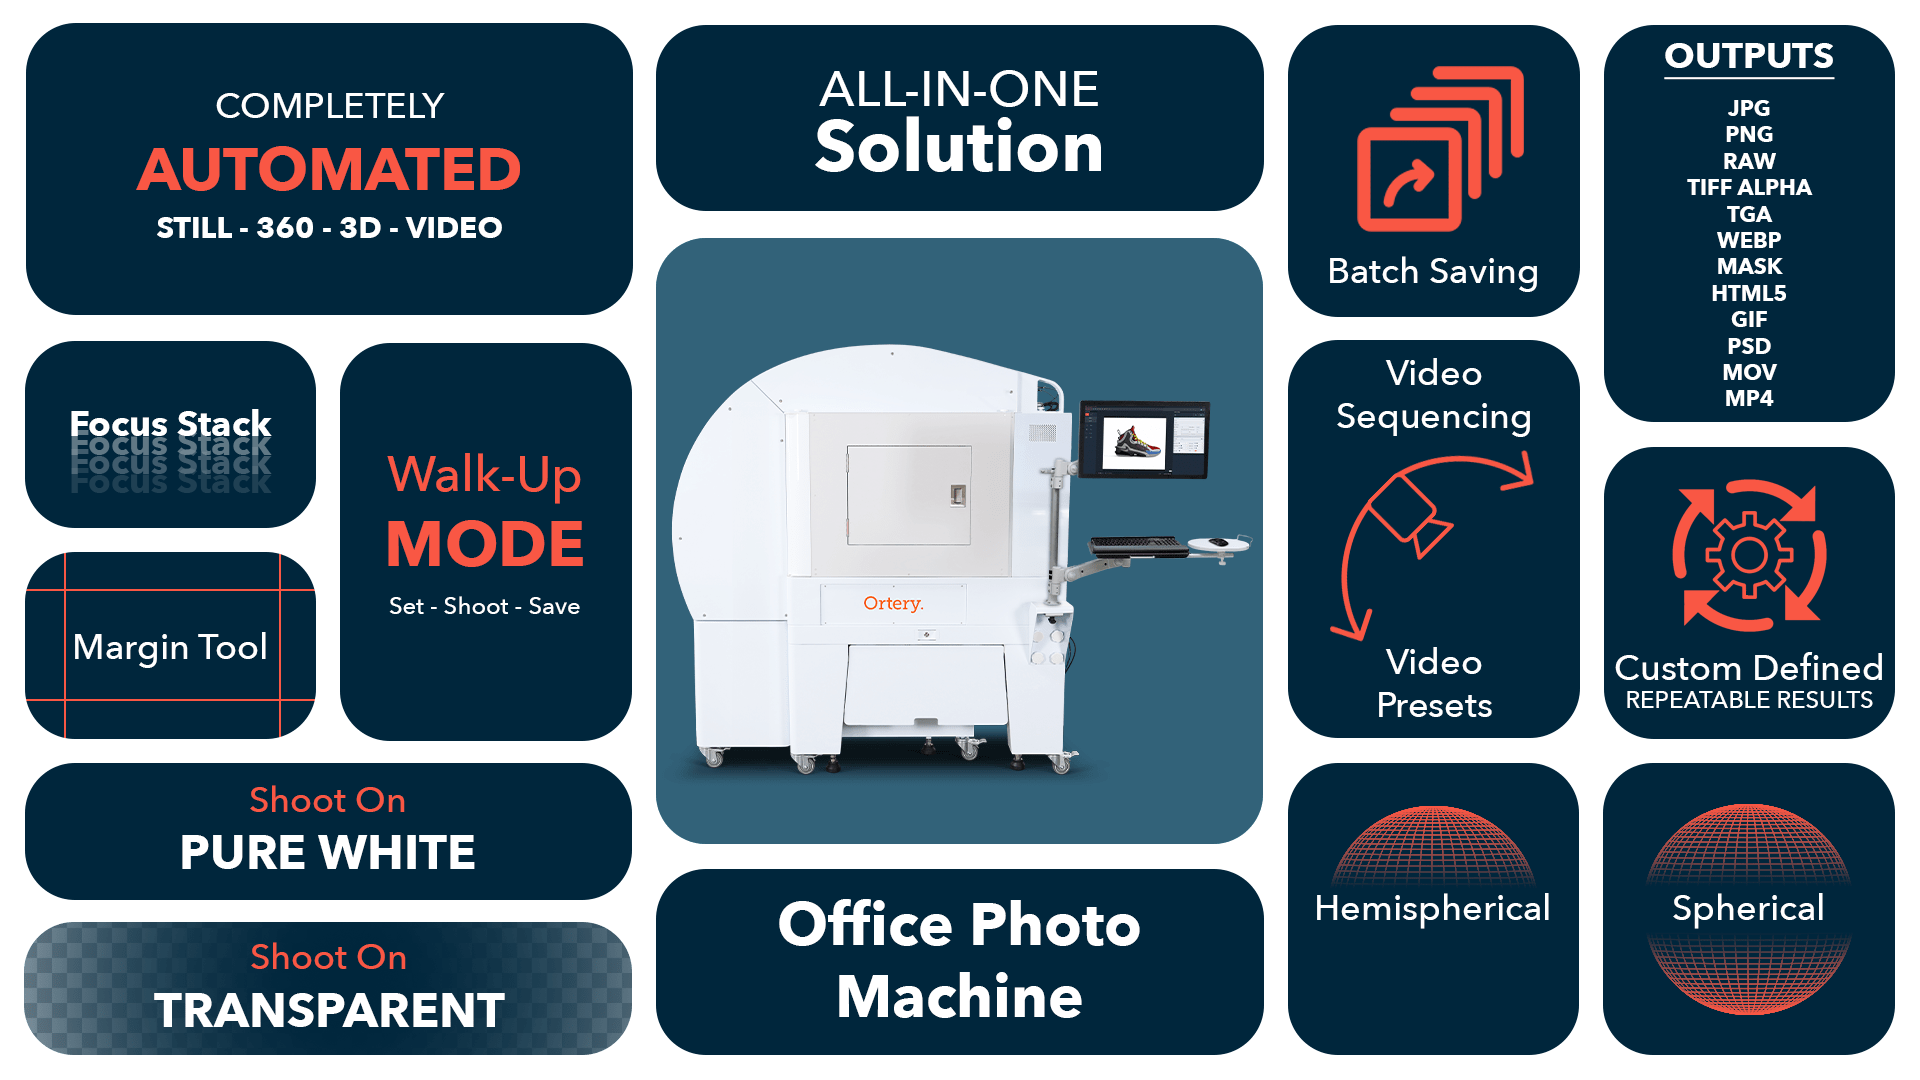 Ortery Office Photo Machine - 3D Video